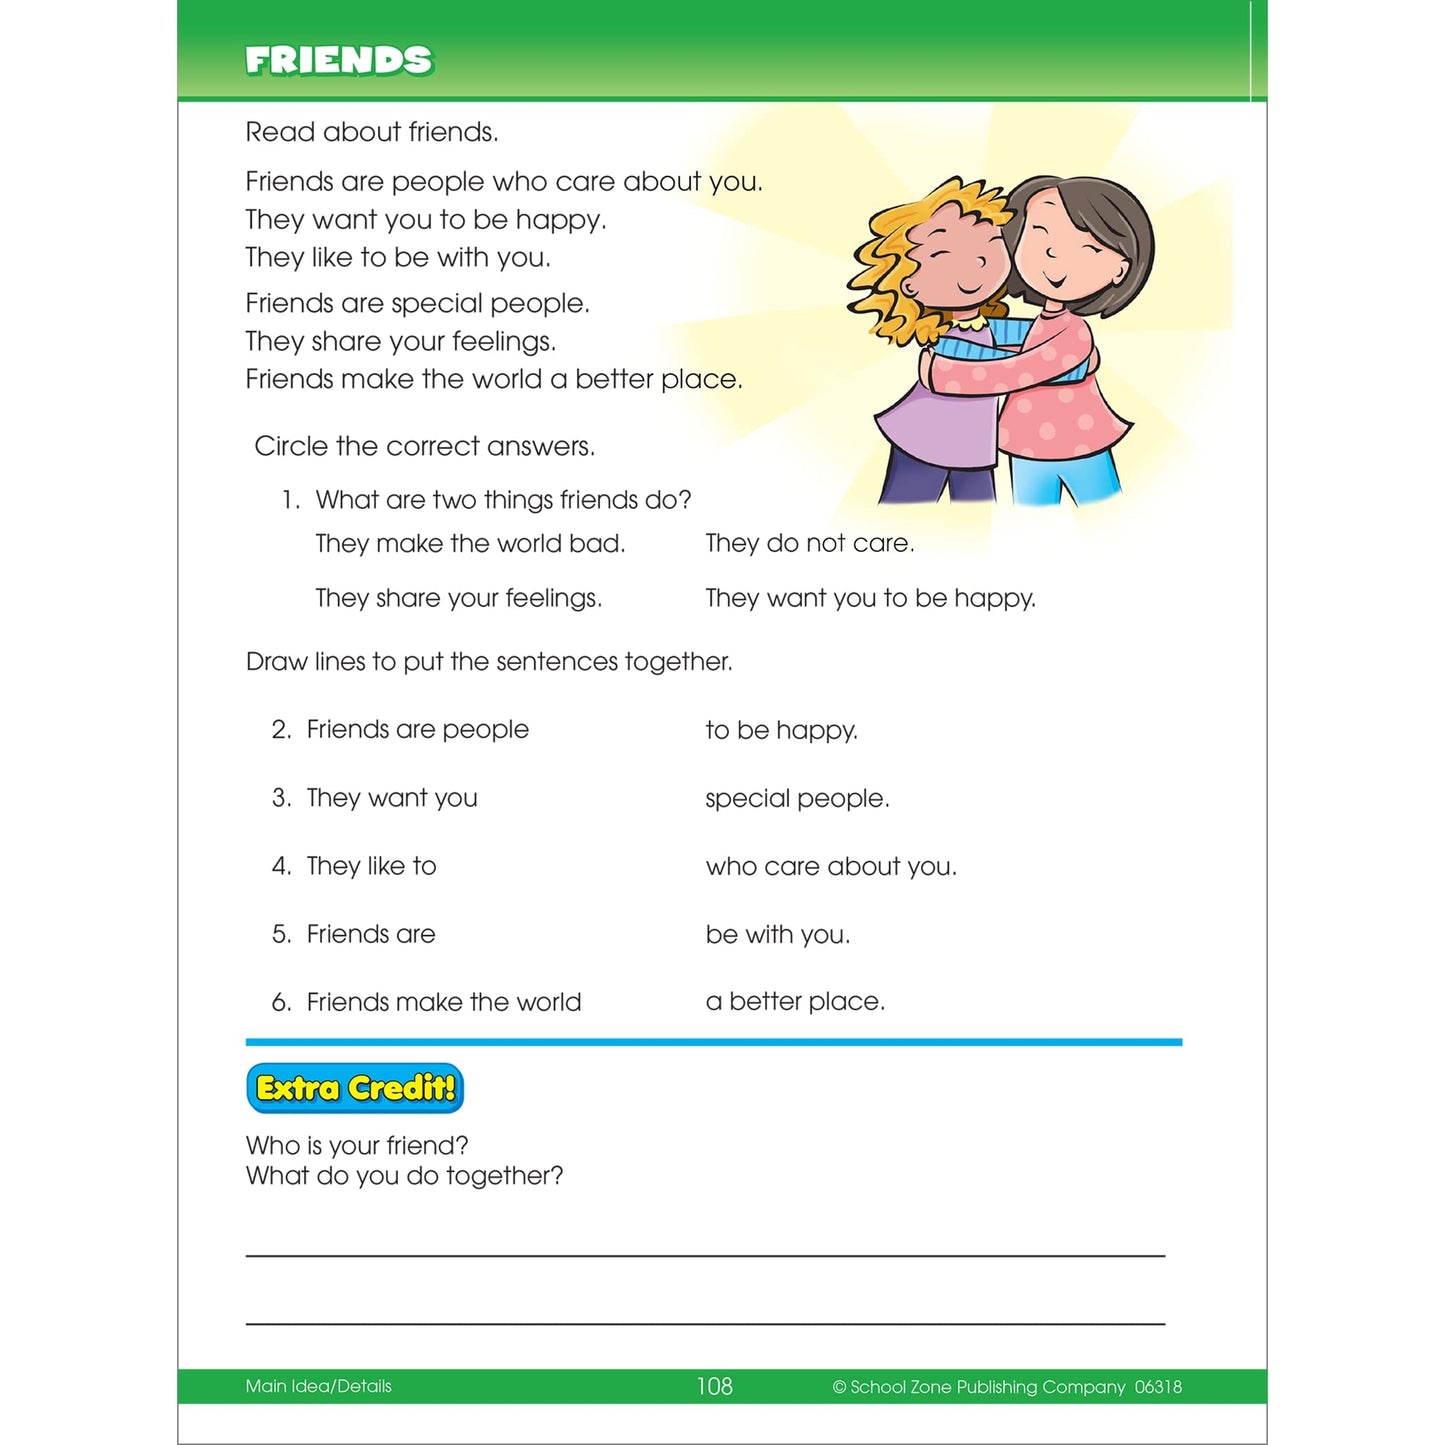 School Zone - Big Second Grade Workbook - 320 Pages, Ages 7 to 8, 2nd Grade, Word Problems, Reading Comprehension, Phonics, Math, Science, and More (School Zone Big Workbook Series)